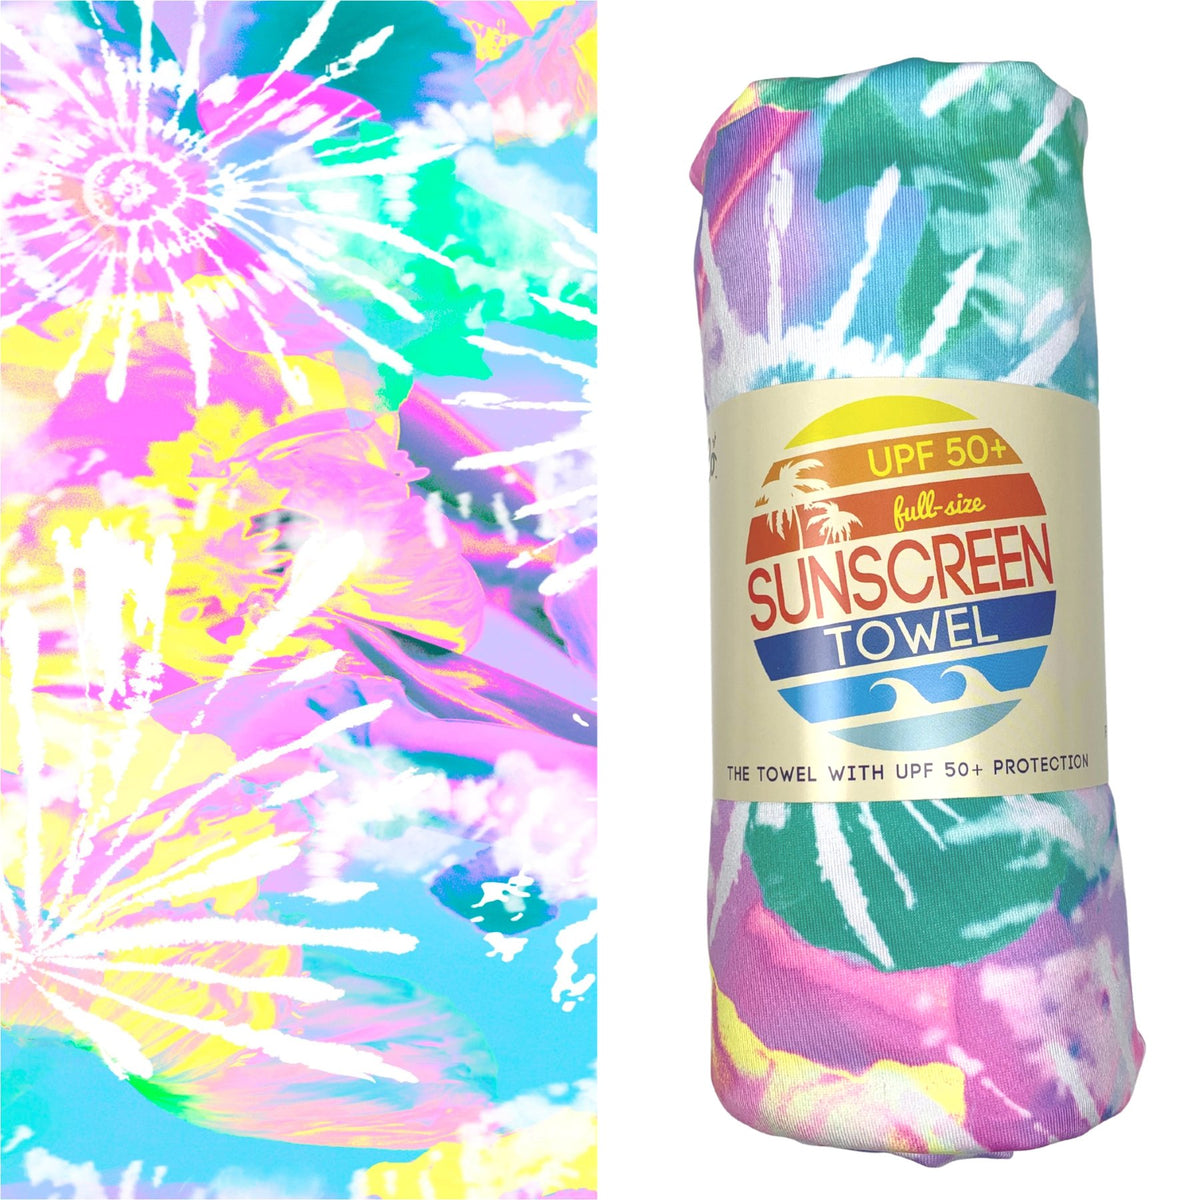 Luv Bug Co Hooded UPF 50+Sunscreen Towel - Full Size - Pastel Tie Dye